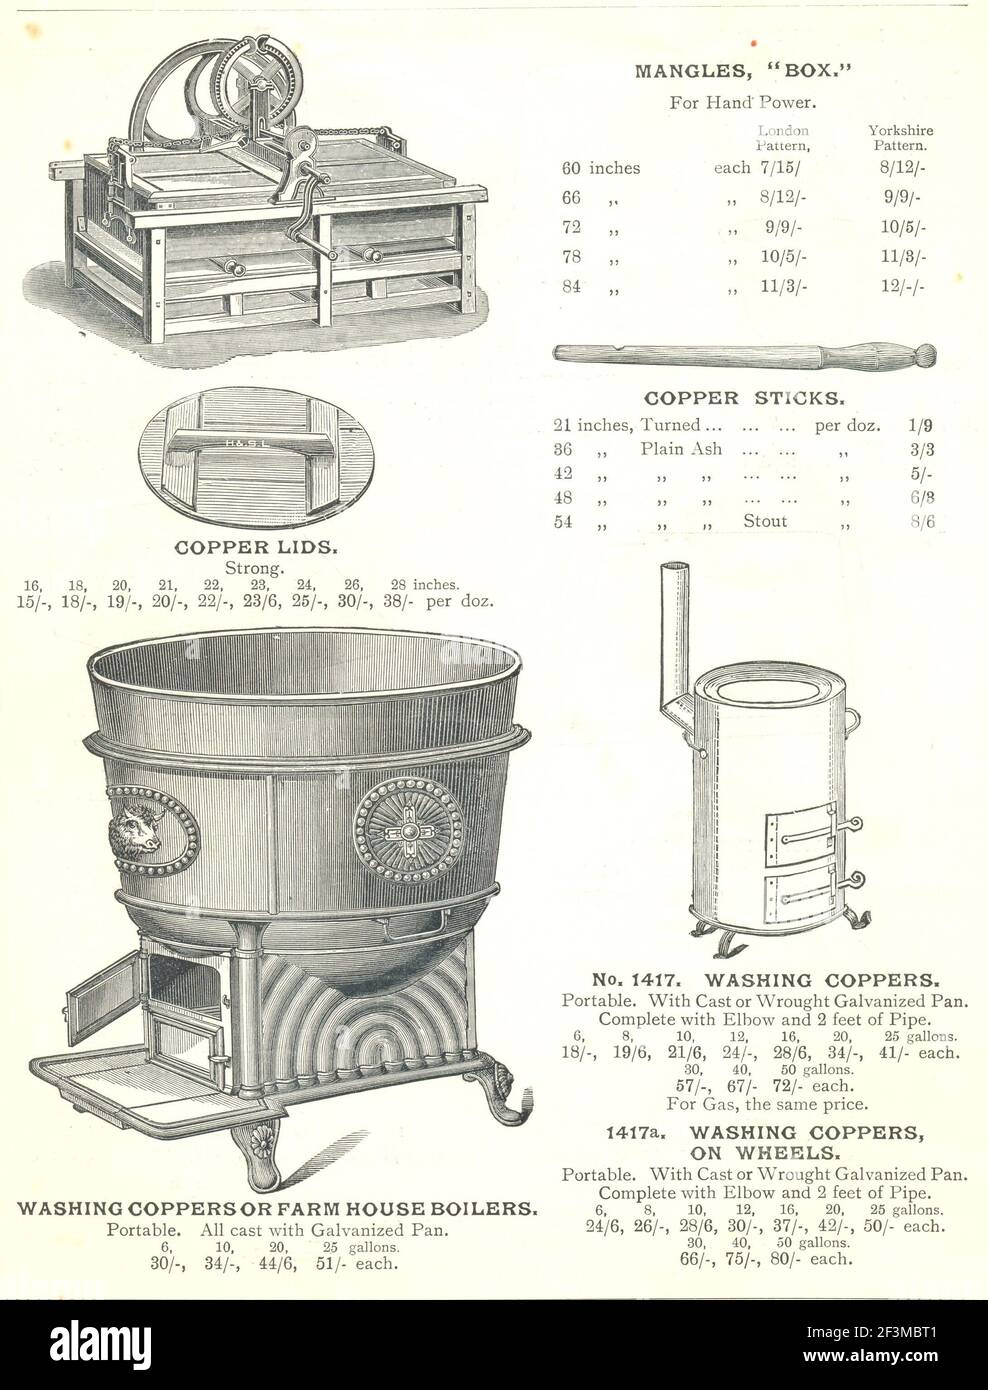 Page showing box mangle and washing coppers from catalogue 'Competition Guide' for the Ironmongery and Hardware Trades published by G Harding & Sons, London S E 1892 Stock Photo